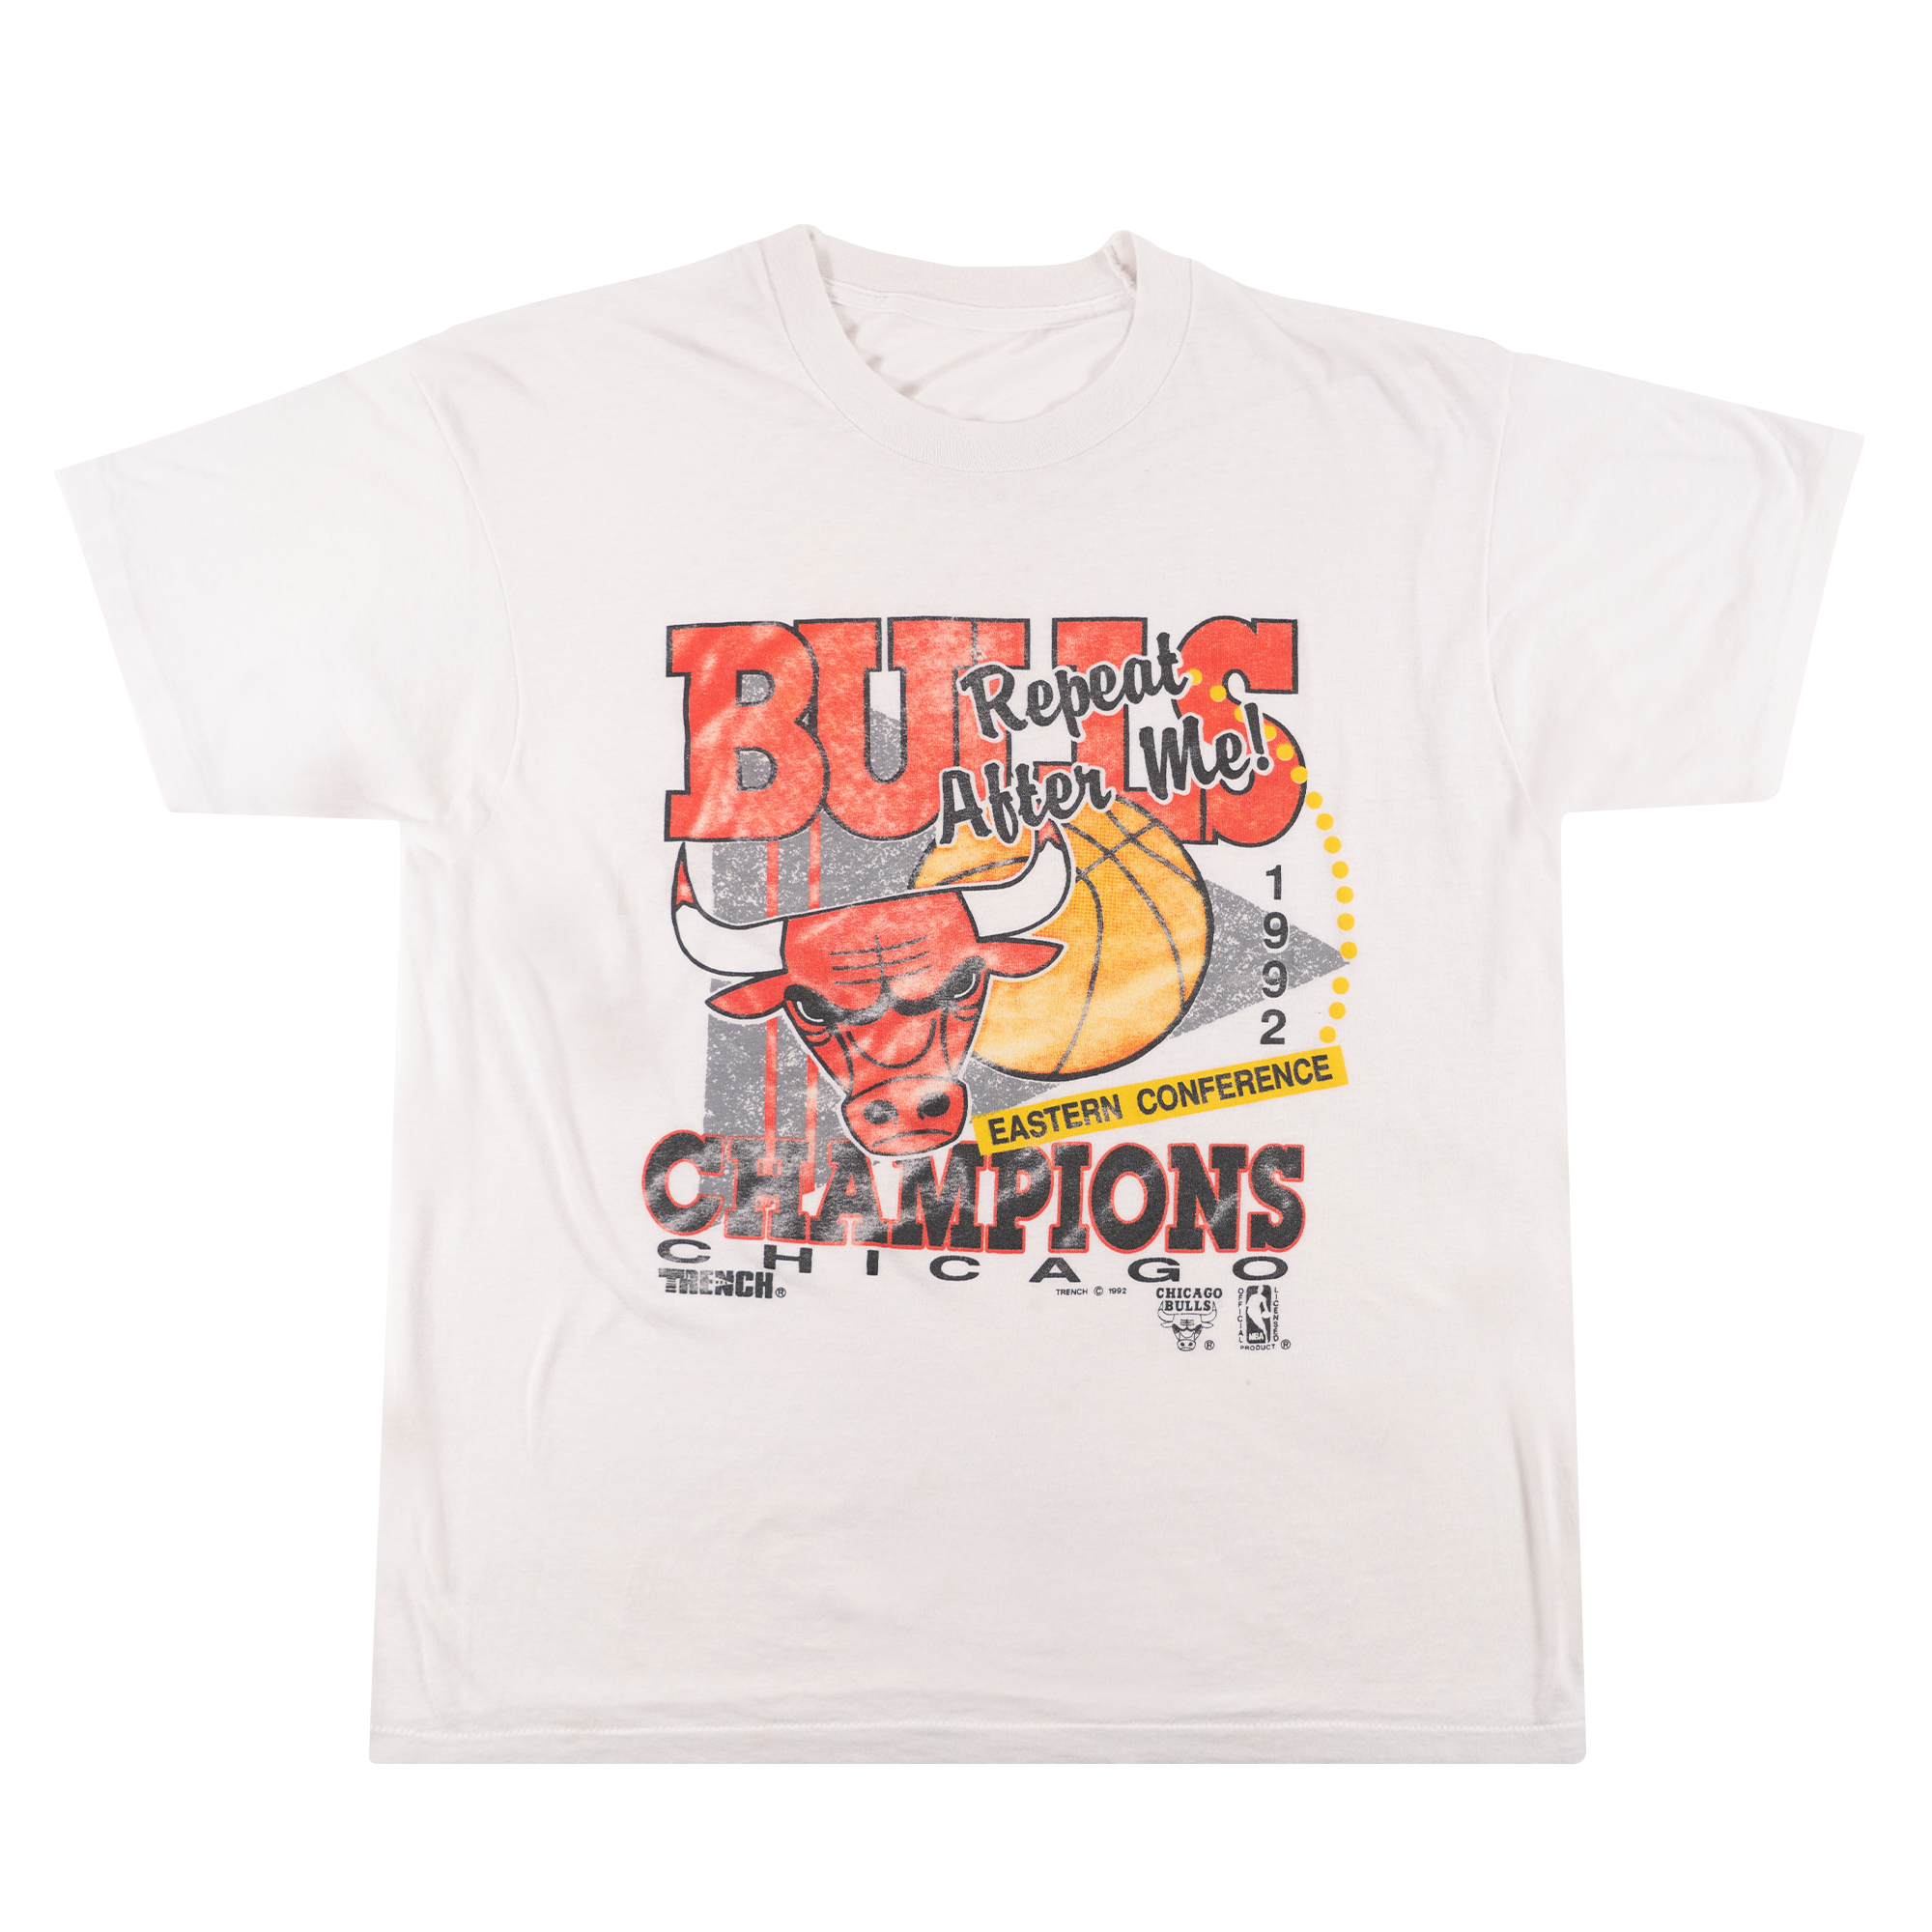 1992 Chicago Bulls Repeat After Me Tee-PLUS